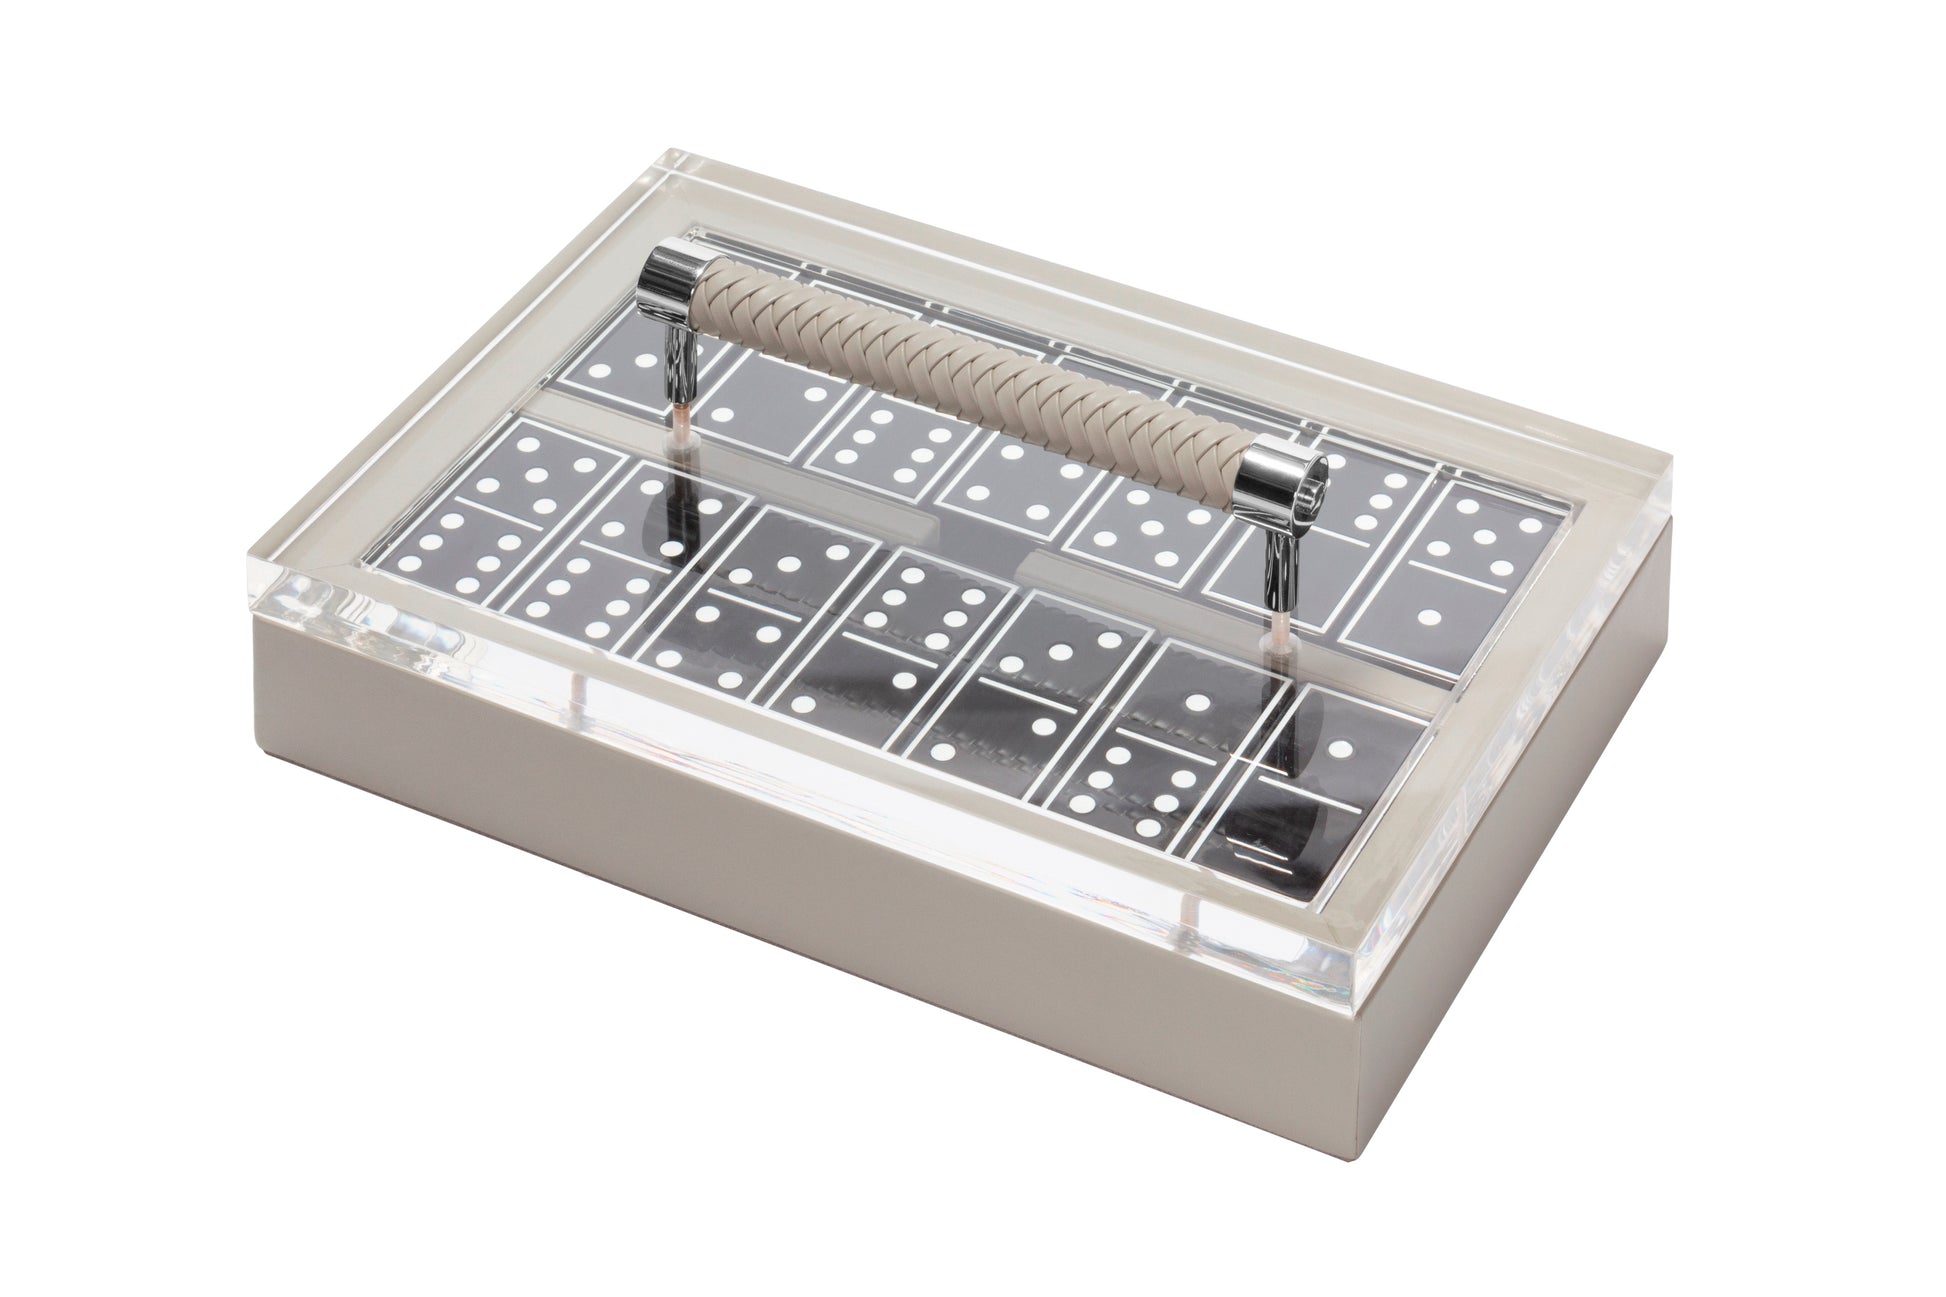 Riviere Diana Leather-Covered Domino Game Set With Acrylic Lid | Elegant Design with Acrylic Lid and Woven Leather Handle | Set Equipped with Highly Resistant Glossy Plexiglass Domino Pieces | Choose Between Black or White Finish | Explore a Range of Luxury Domino Game Sets at 2Jour Concierge, #1 luxury high-end gift & lifestyle shop